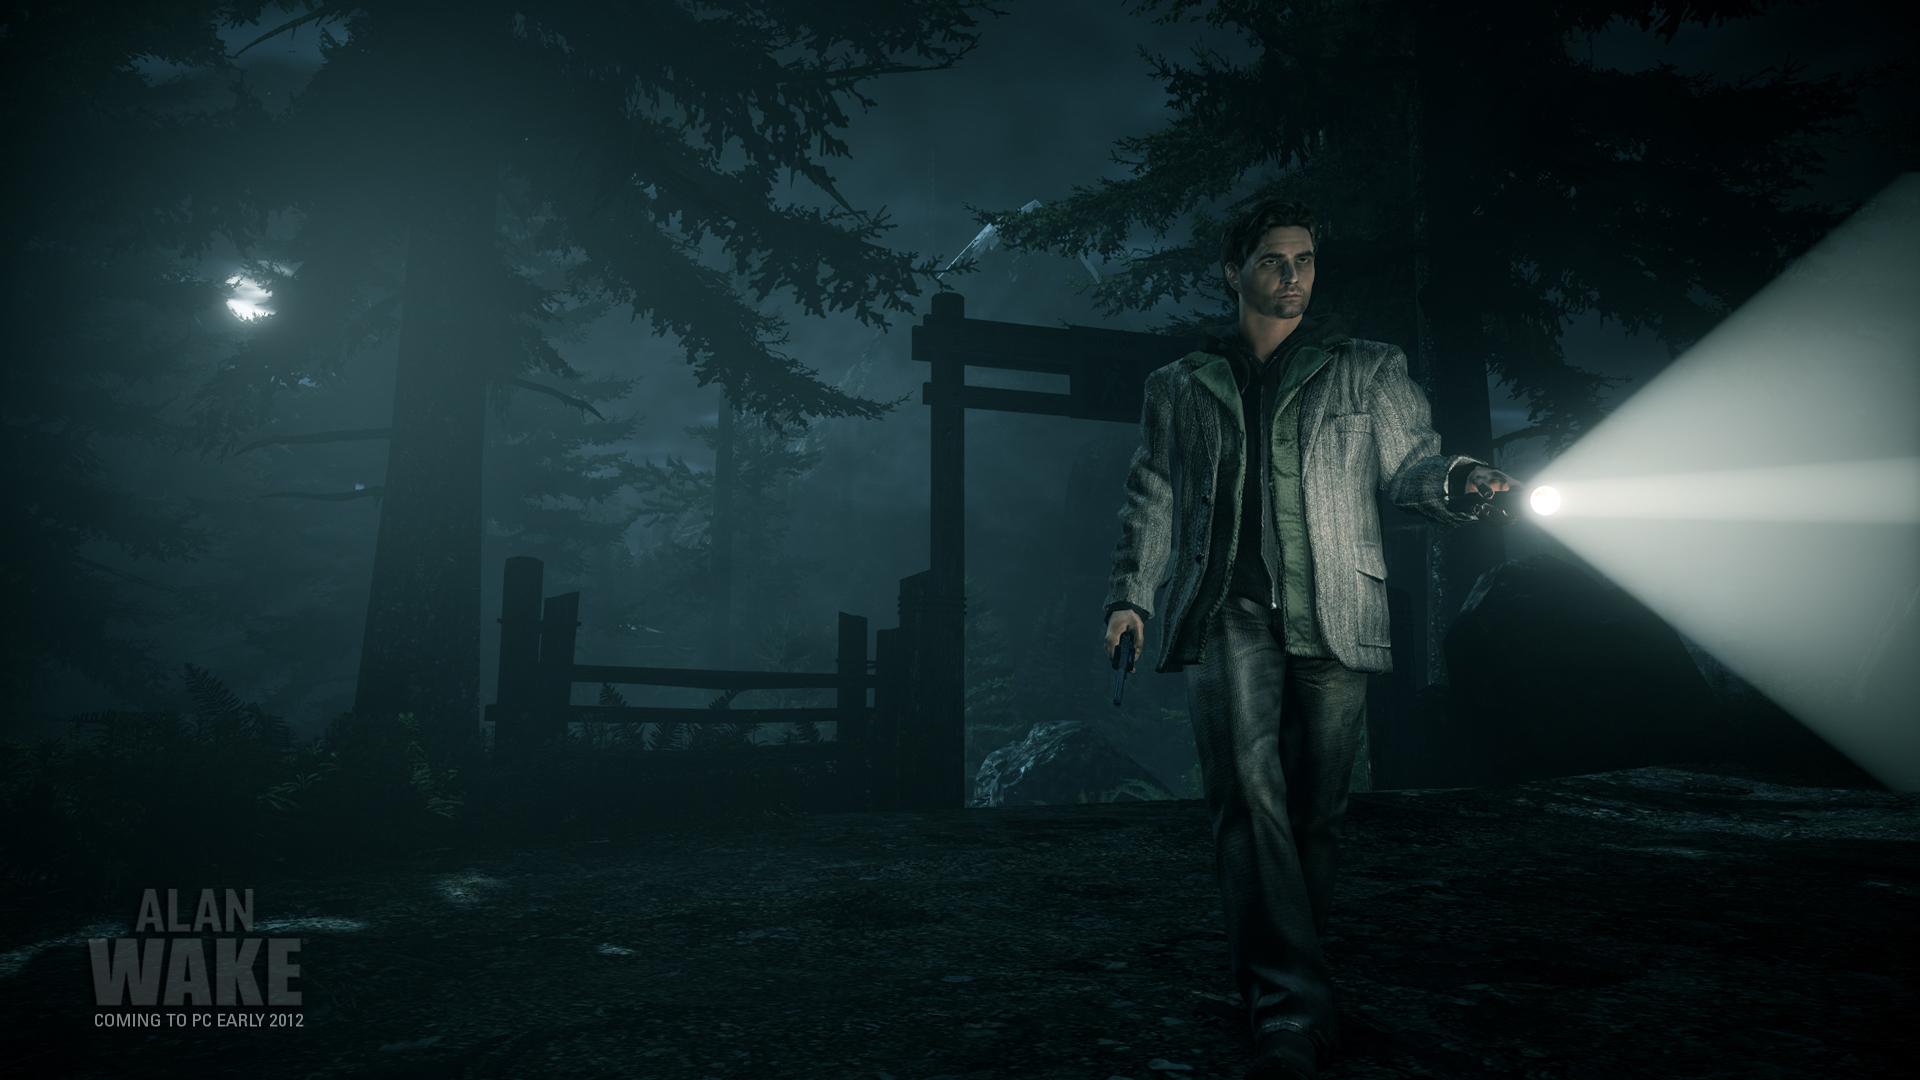 Alan Wake 2 missions list, All chapters & how many to expect